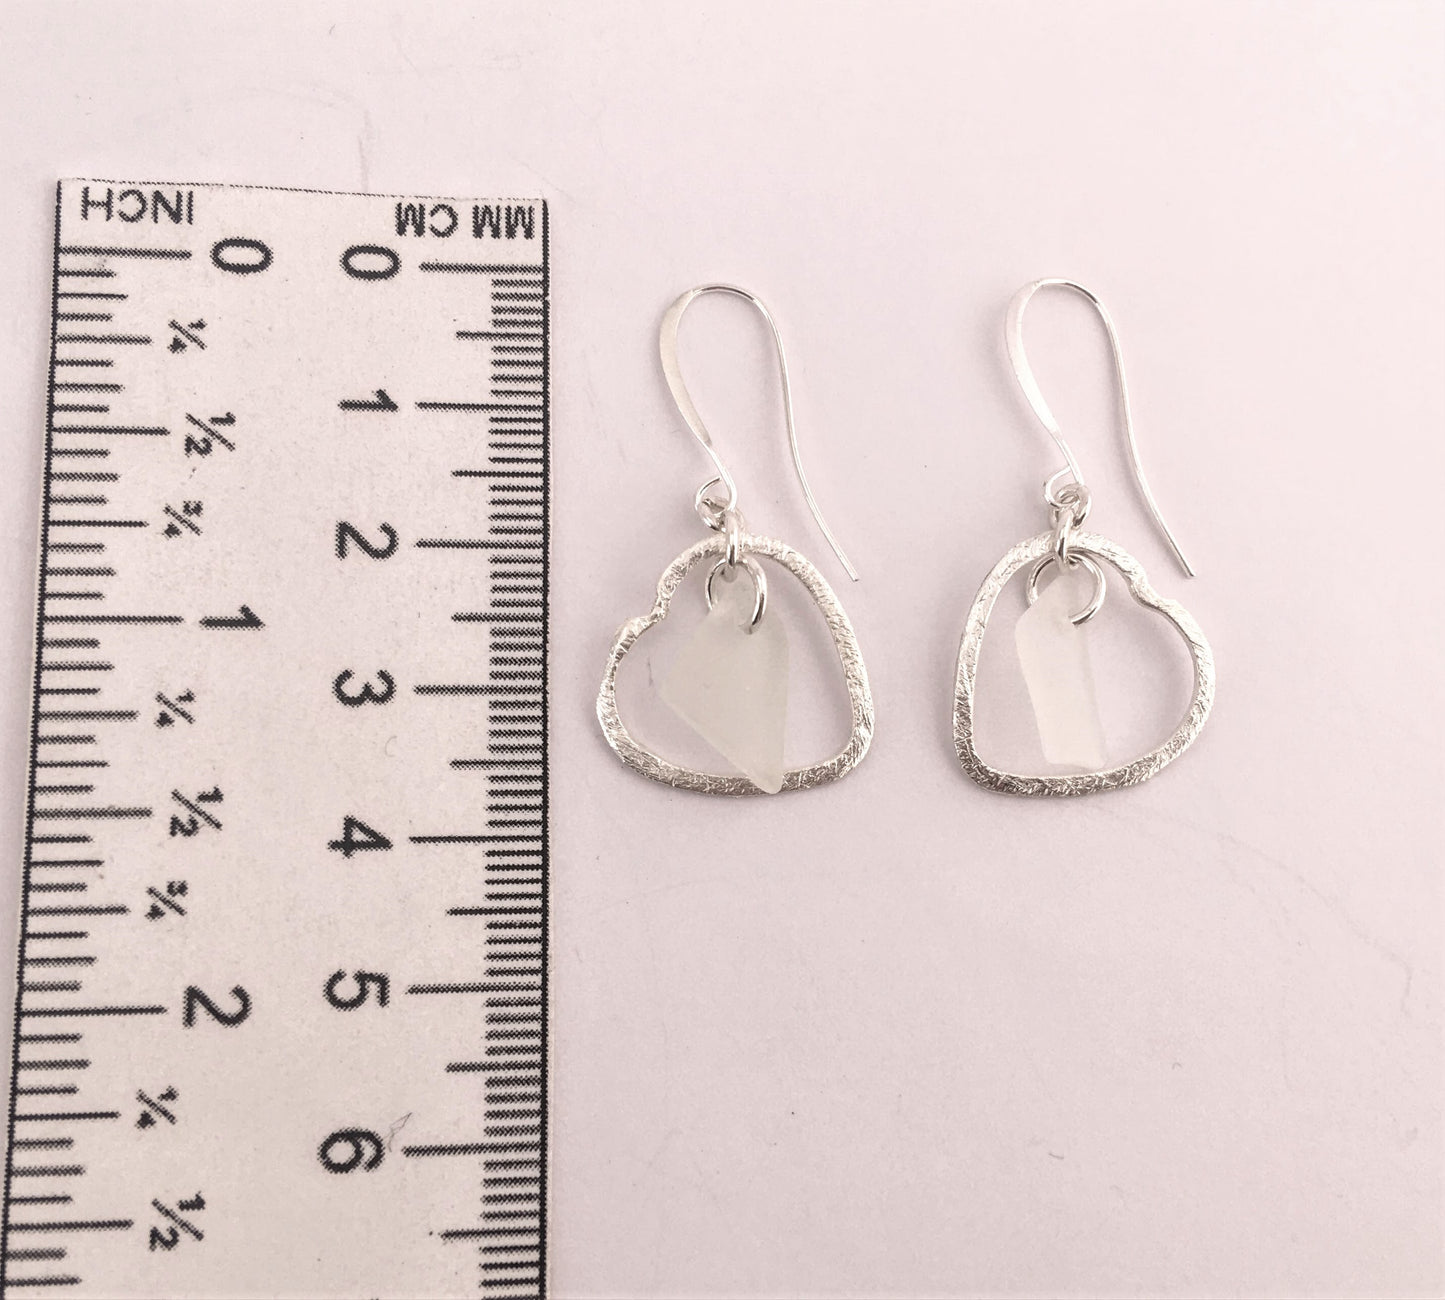 Heart Earrings - White Sea Glass from the South Shore of Nova Scotia, Canada and Sterling Silver